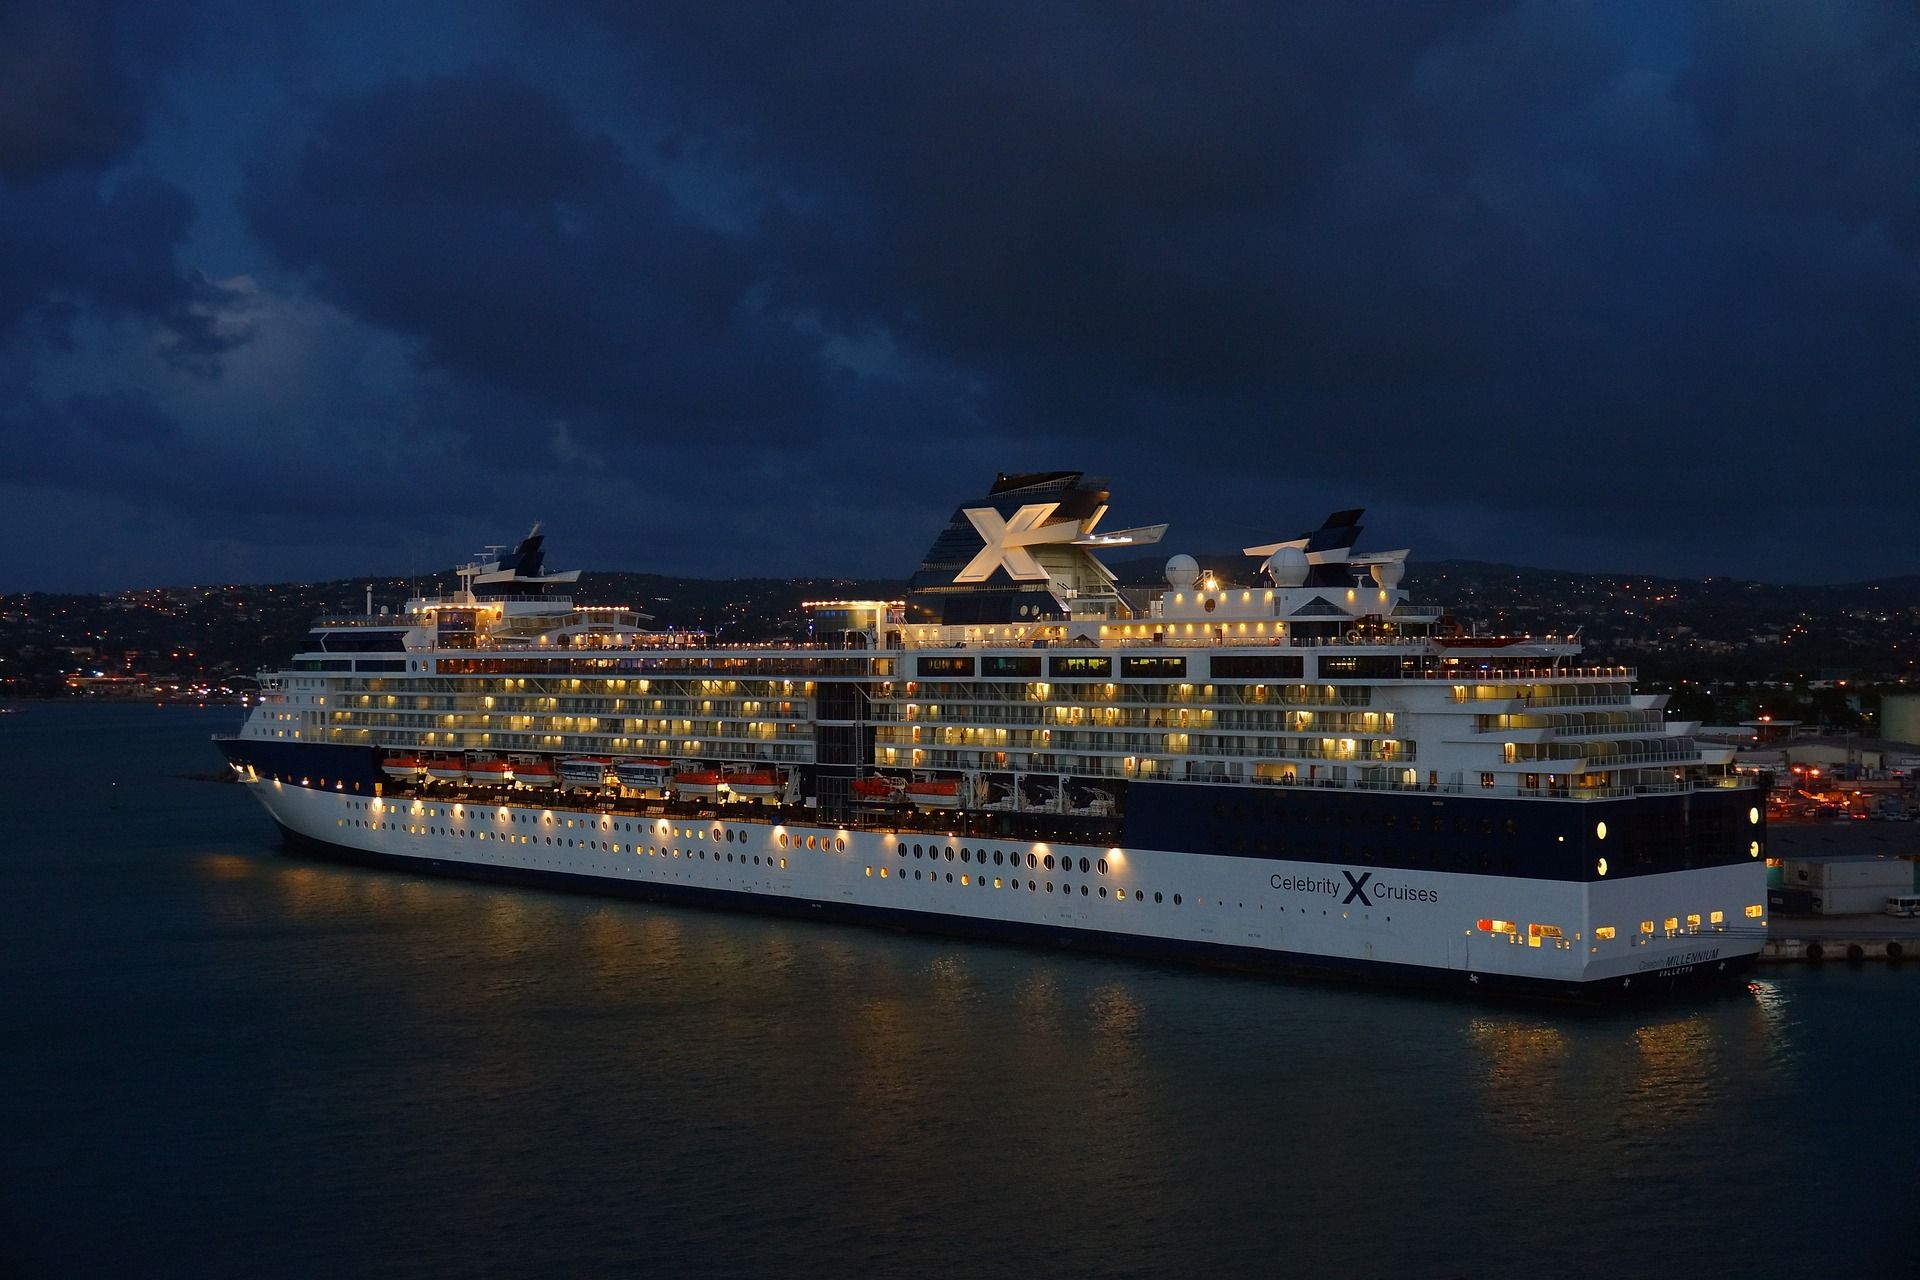 The celebrity Cruise at night in its full glory